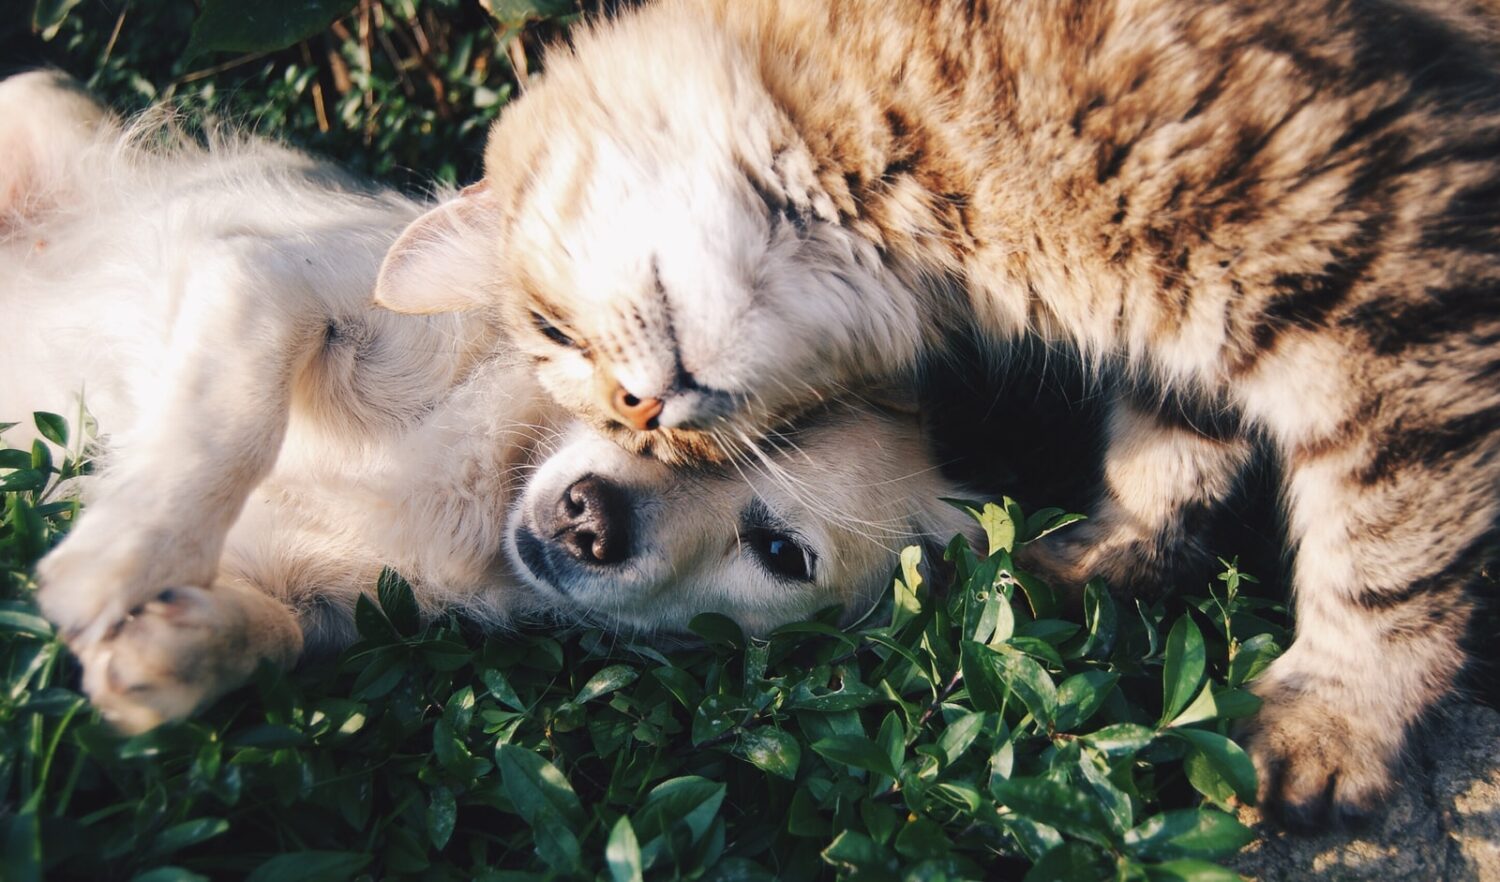 Legal Marijuana Has Led To All Sorts Of Pets Are Getting Accidentally High